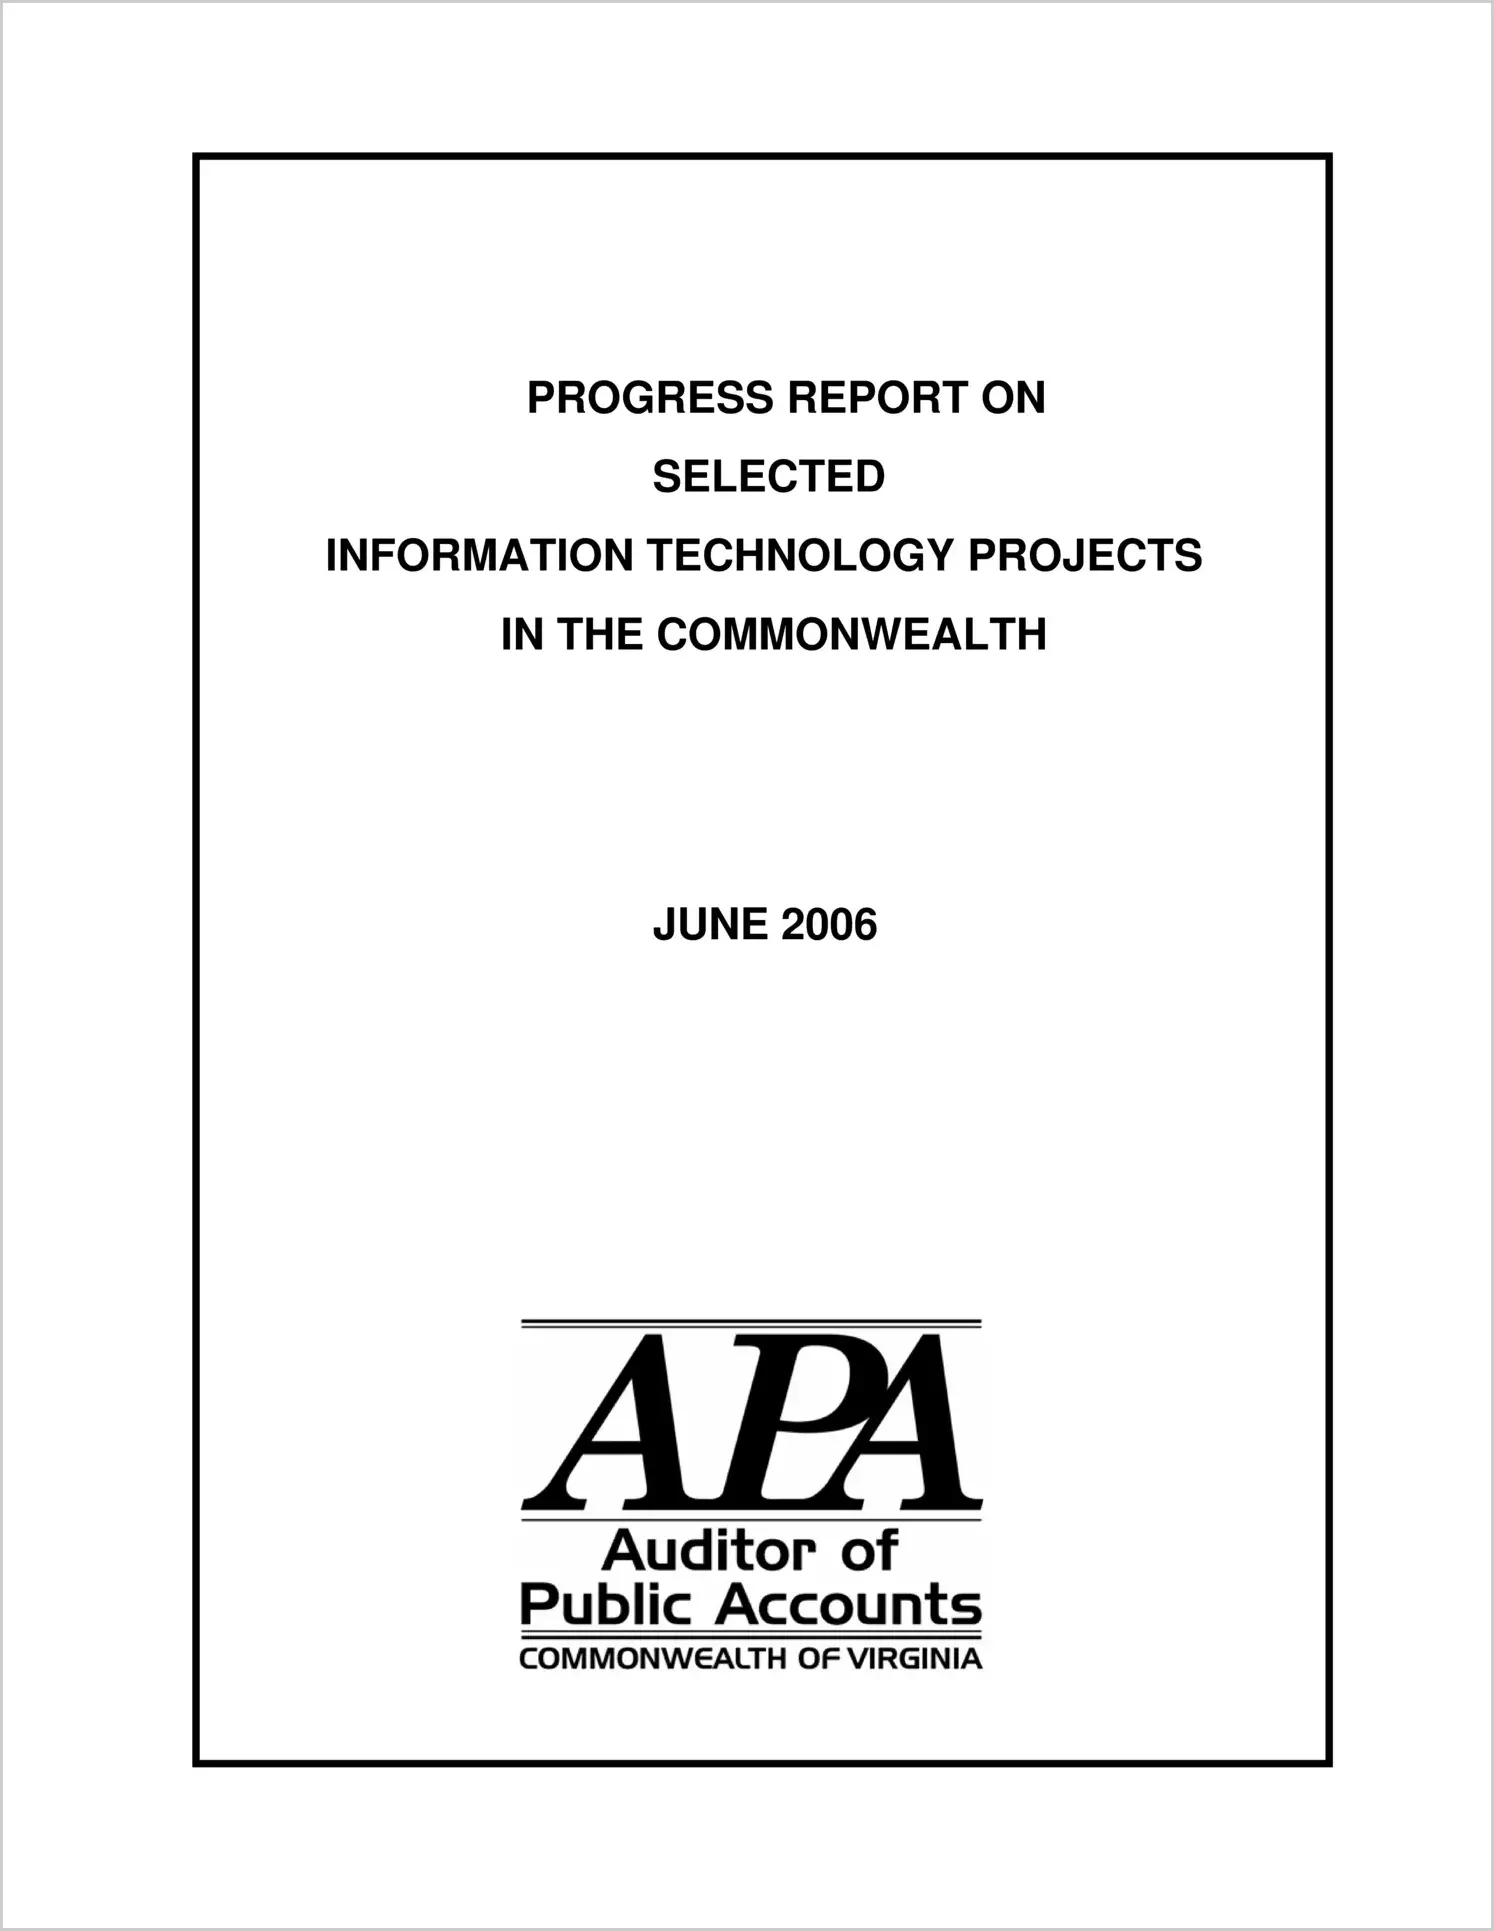 Progress Report on Selected Information Technology Projects in the Commonwealth June 2006